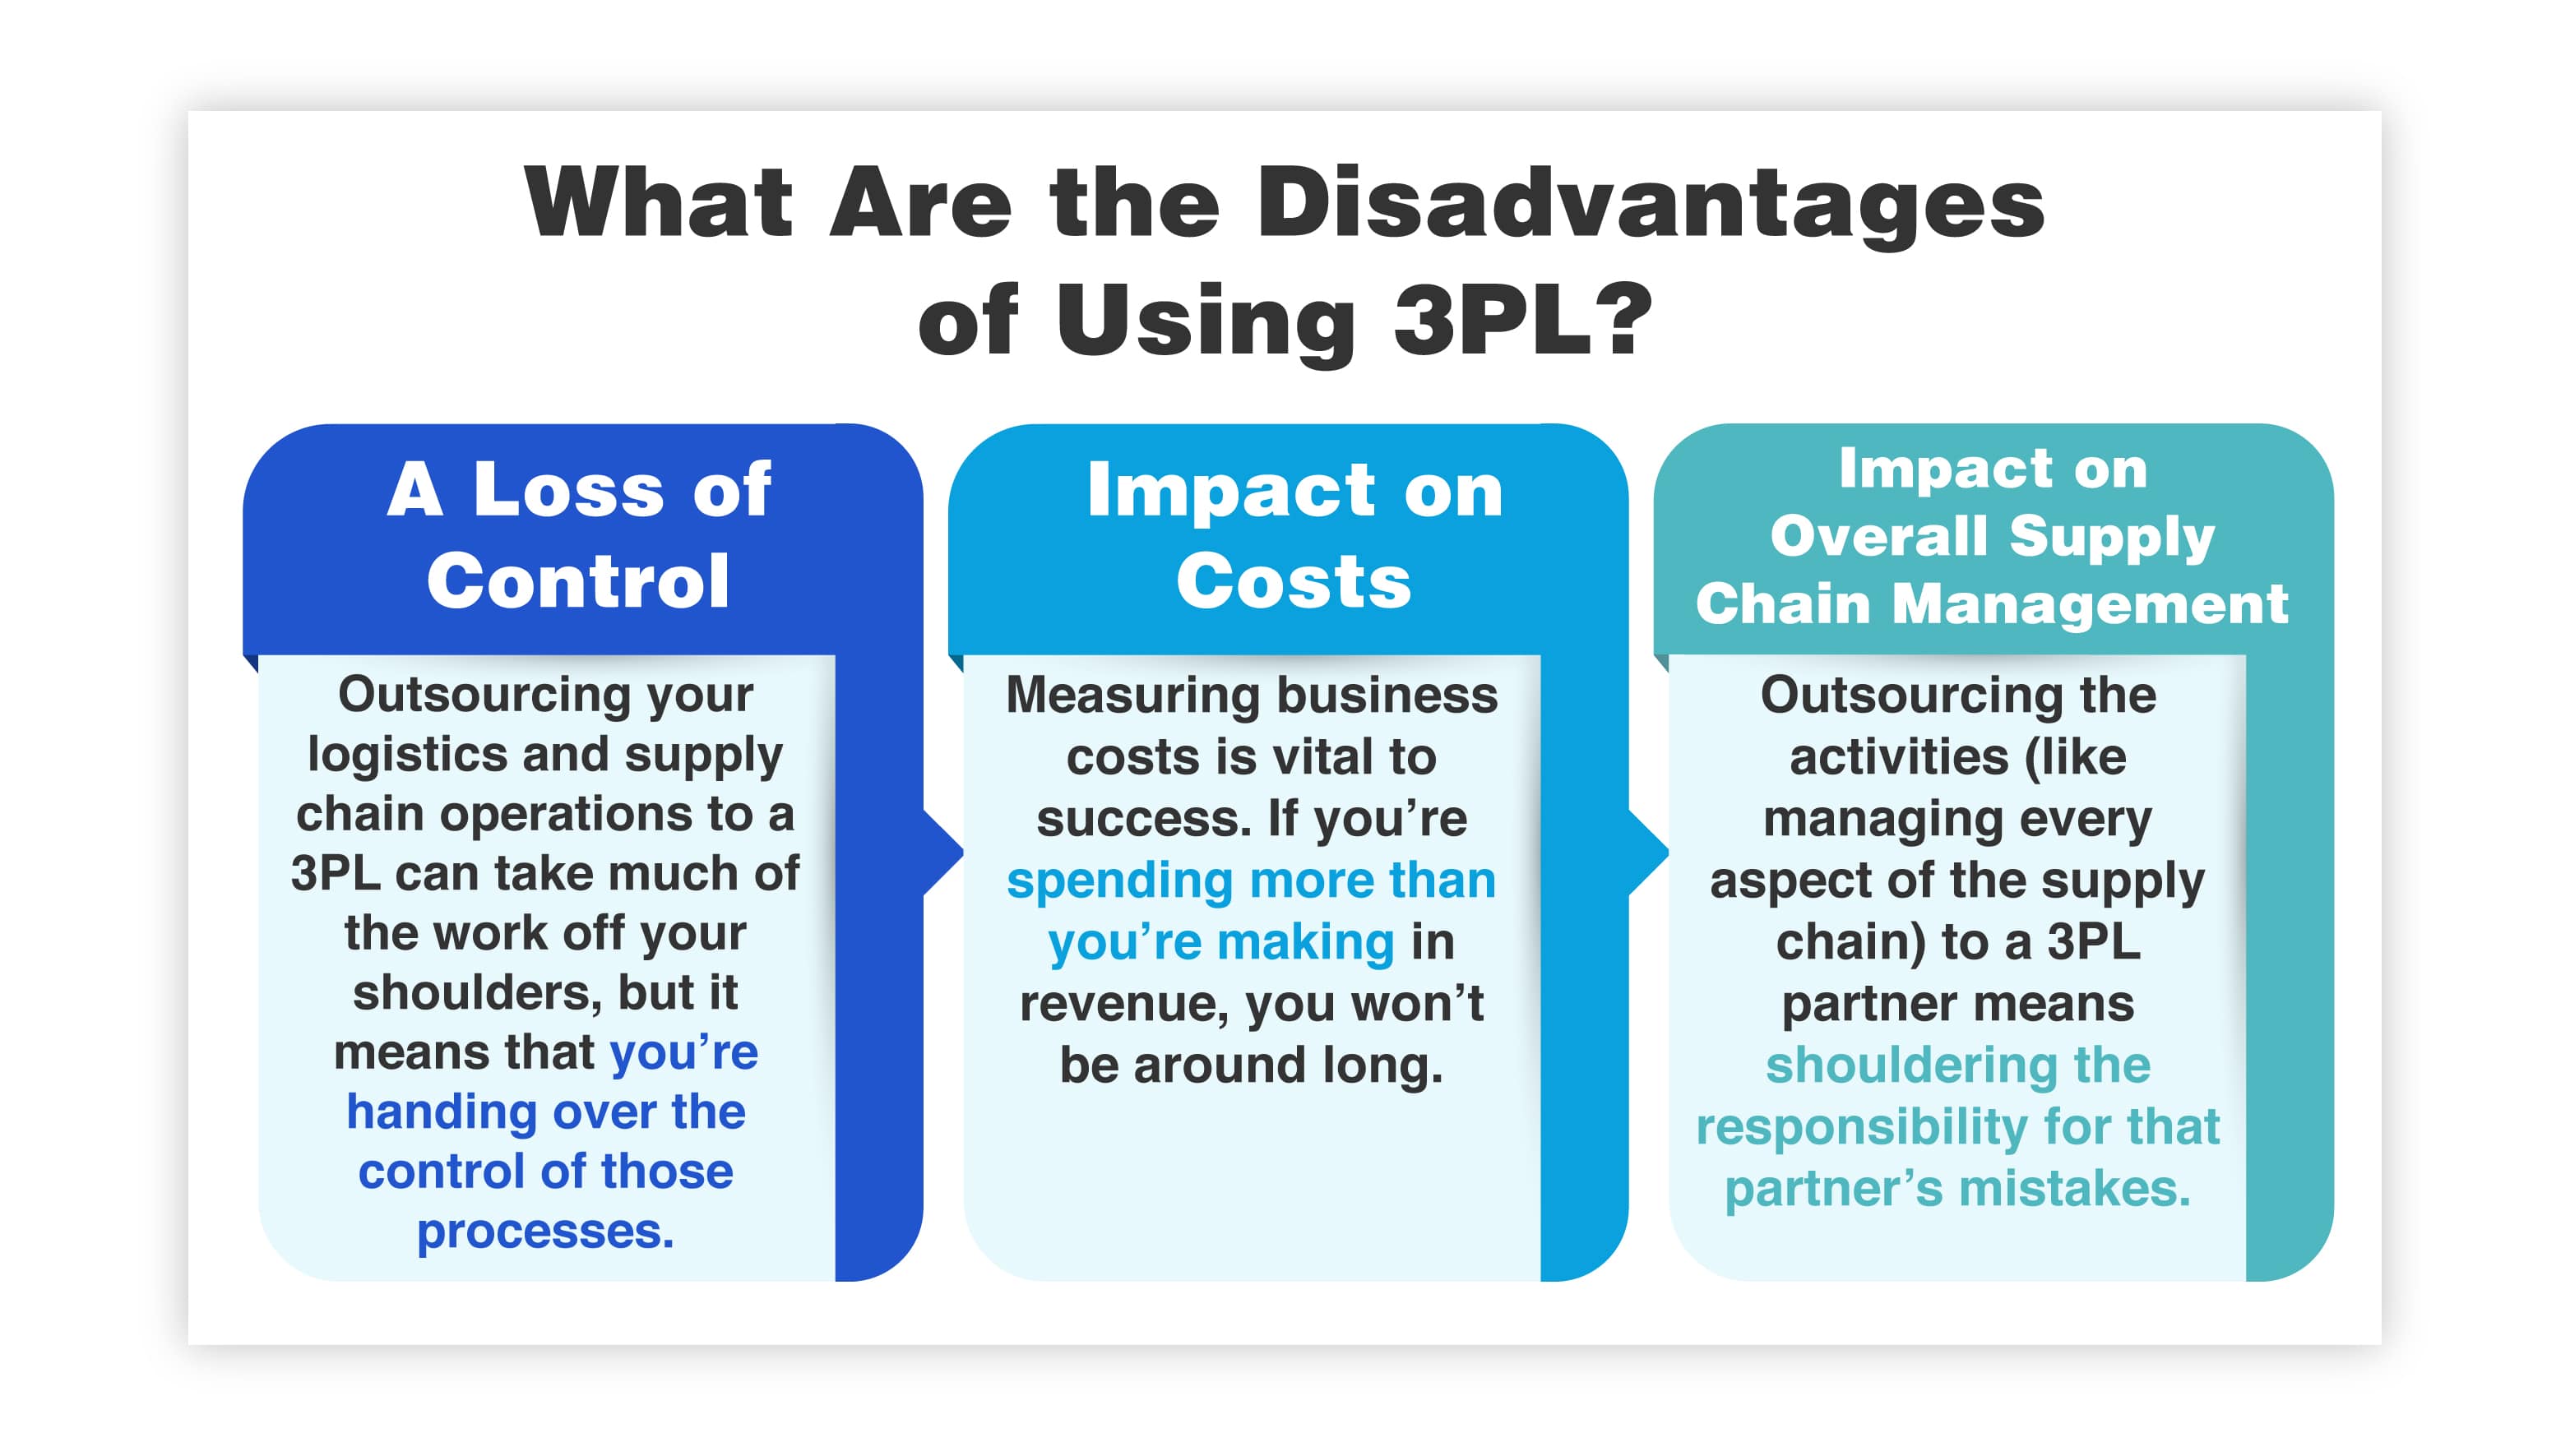 What Are the Disadvantages of Using 3PL?